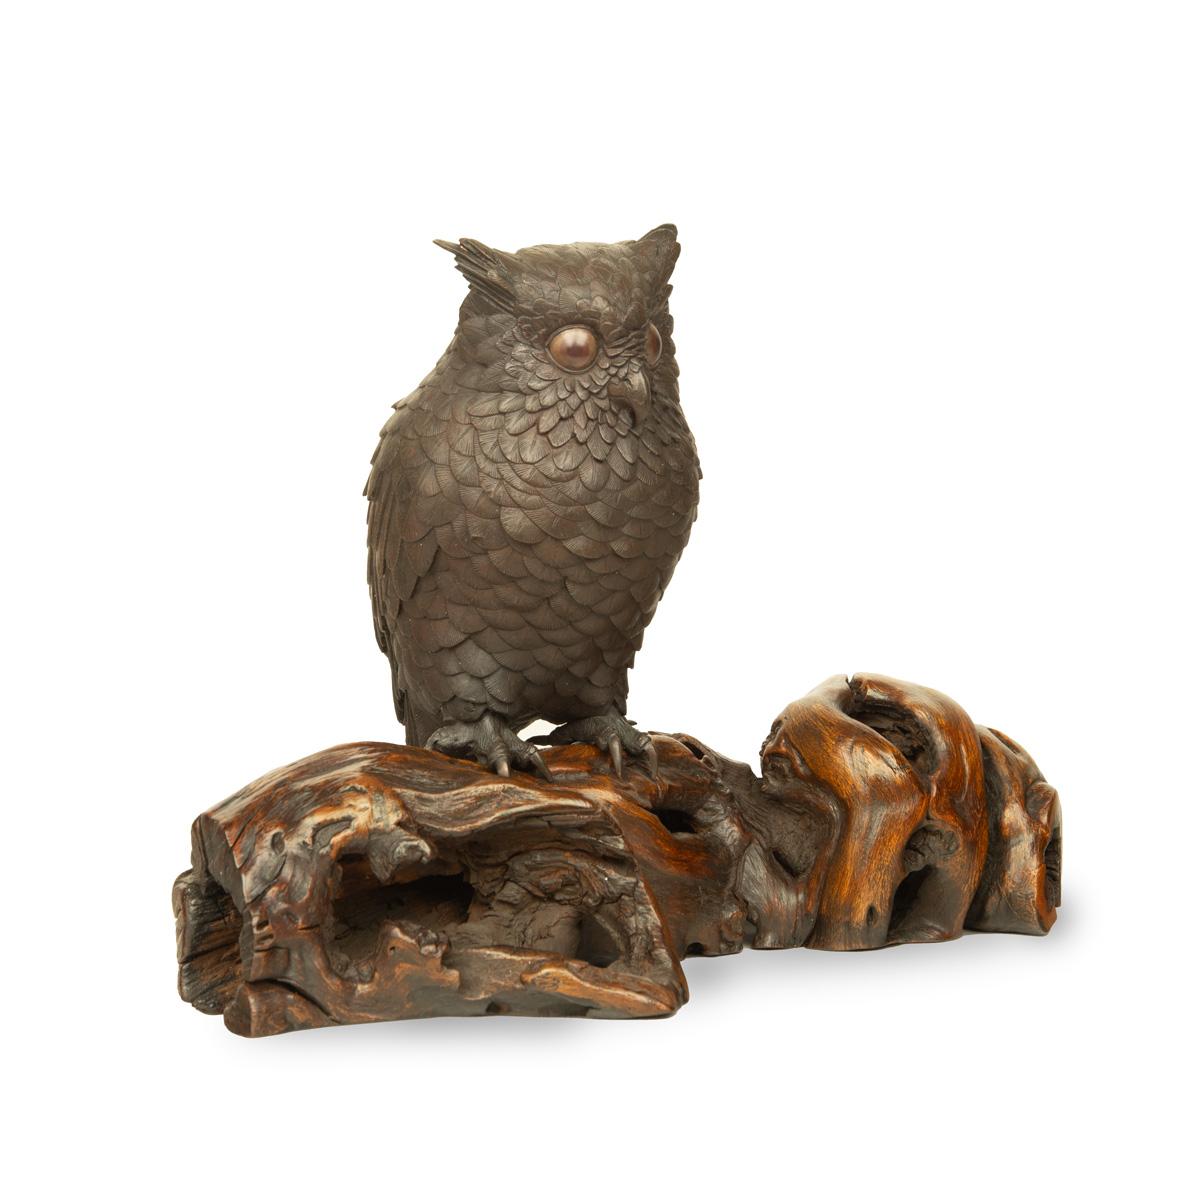 As part of our Japanese works of art collection we are delighted to offer this most enchanting Meiji Period (1868-1912), bronze okimono depicting a long eared owl upon a rootwood branch, the unknown artist has captured the majestic bird in very fine